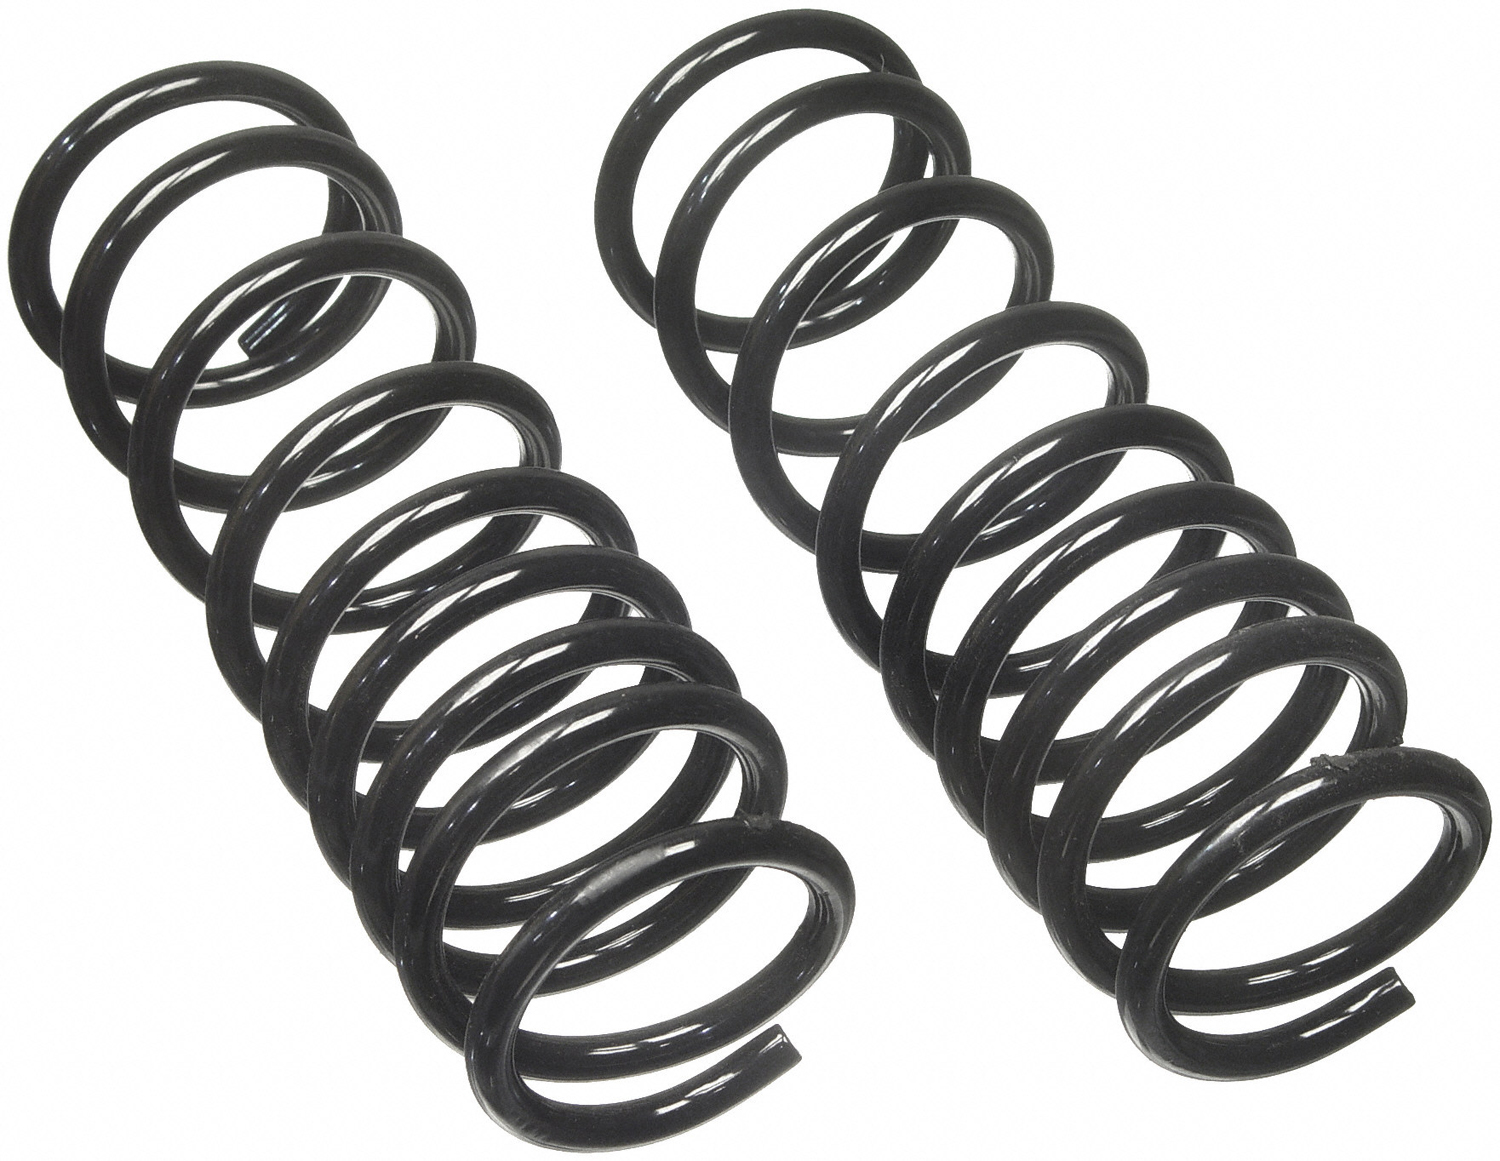 Image of ID CC638 Moog CC638 Coil Spring Set Fits 1985-1985 Buick Somerset Regal